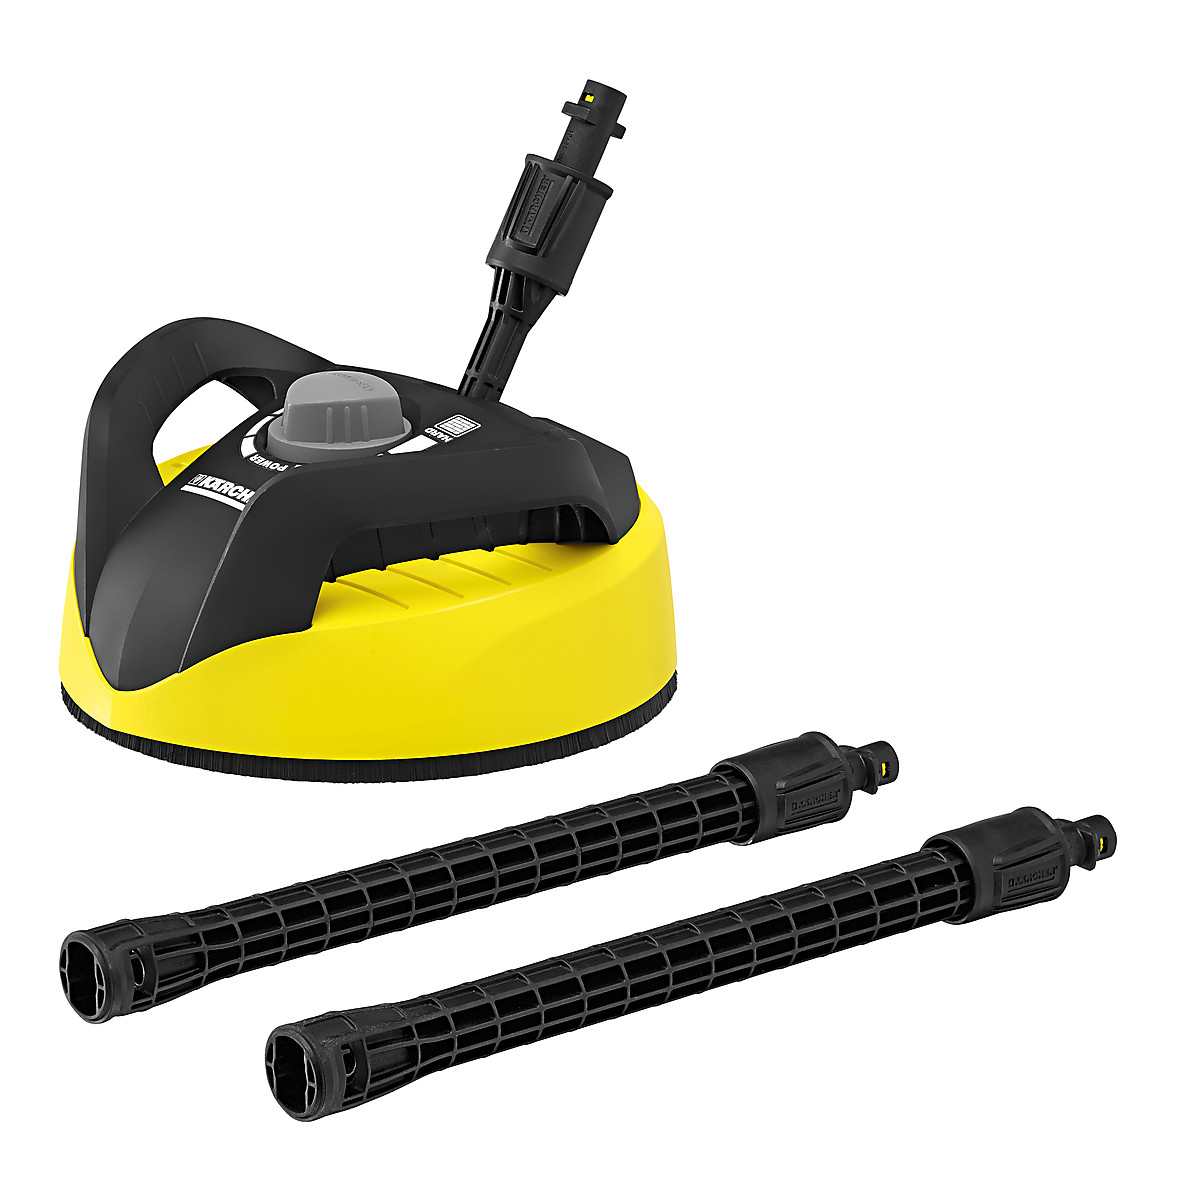 Karcher T 350 Patio Cleaner Clas Ohlson intended for dimensions 1200 X 1200